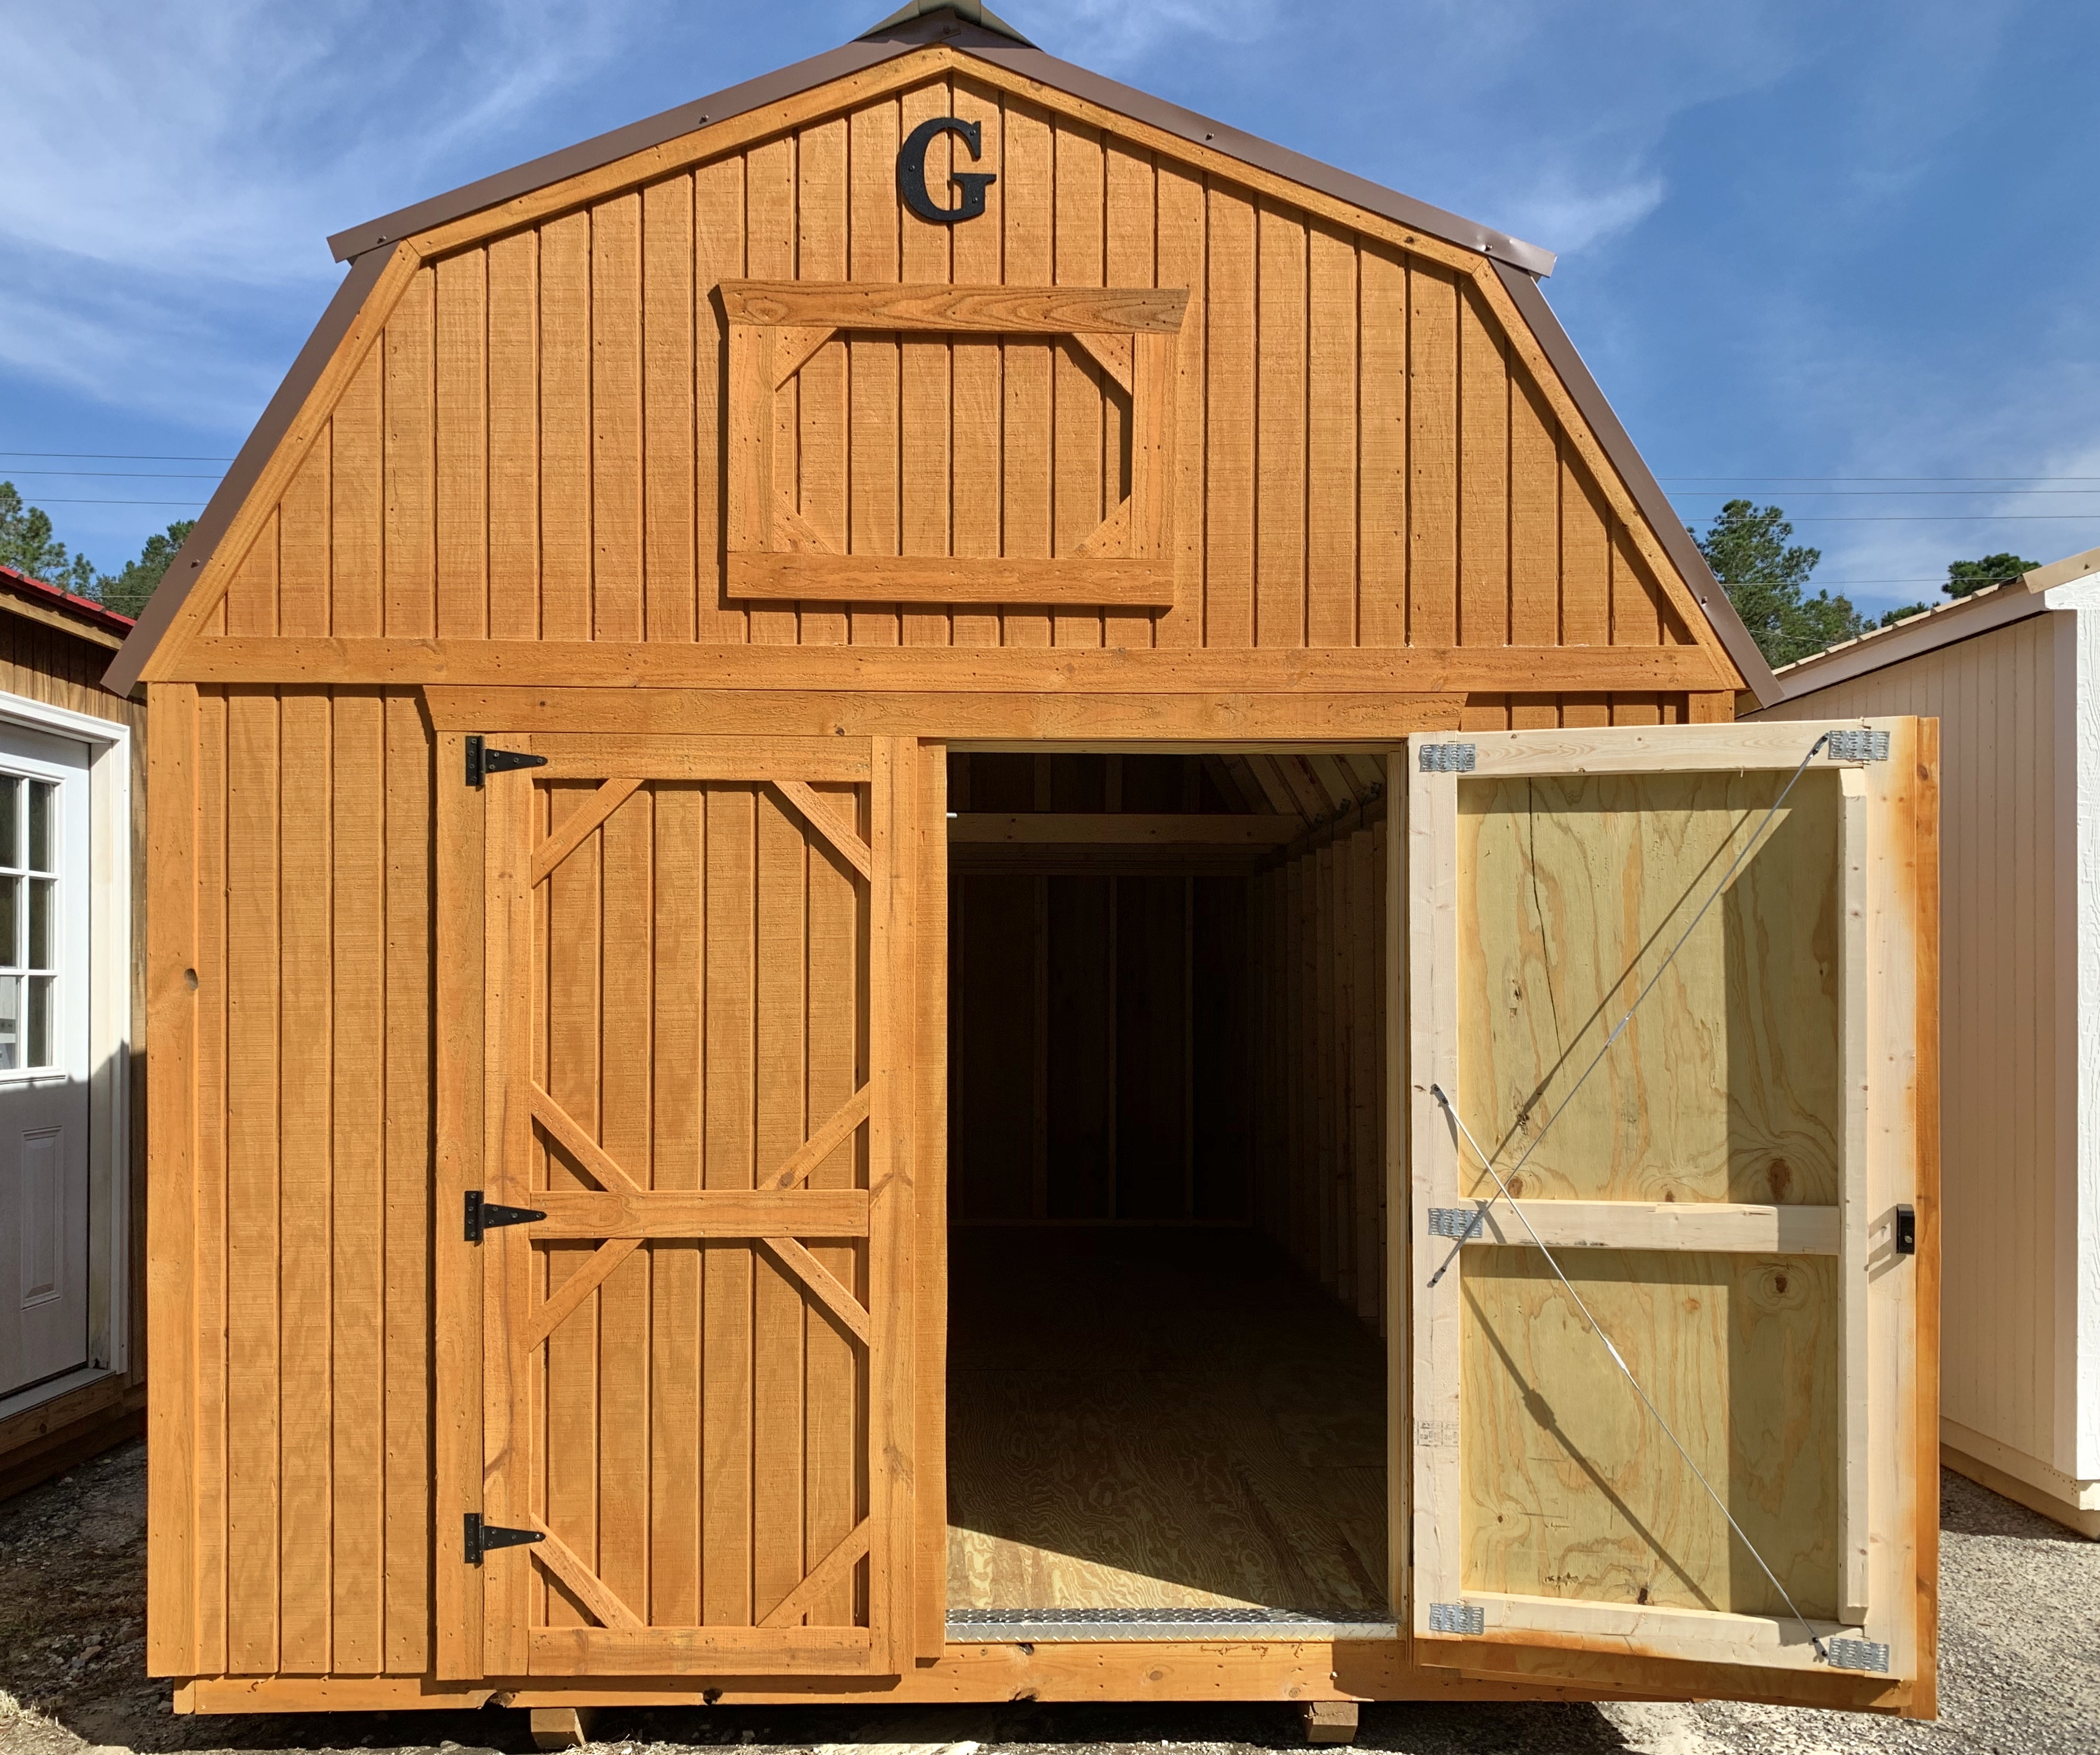 Shed With Garage Door for Sale 10x20 Lofted Barn ...